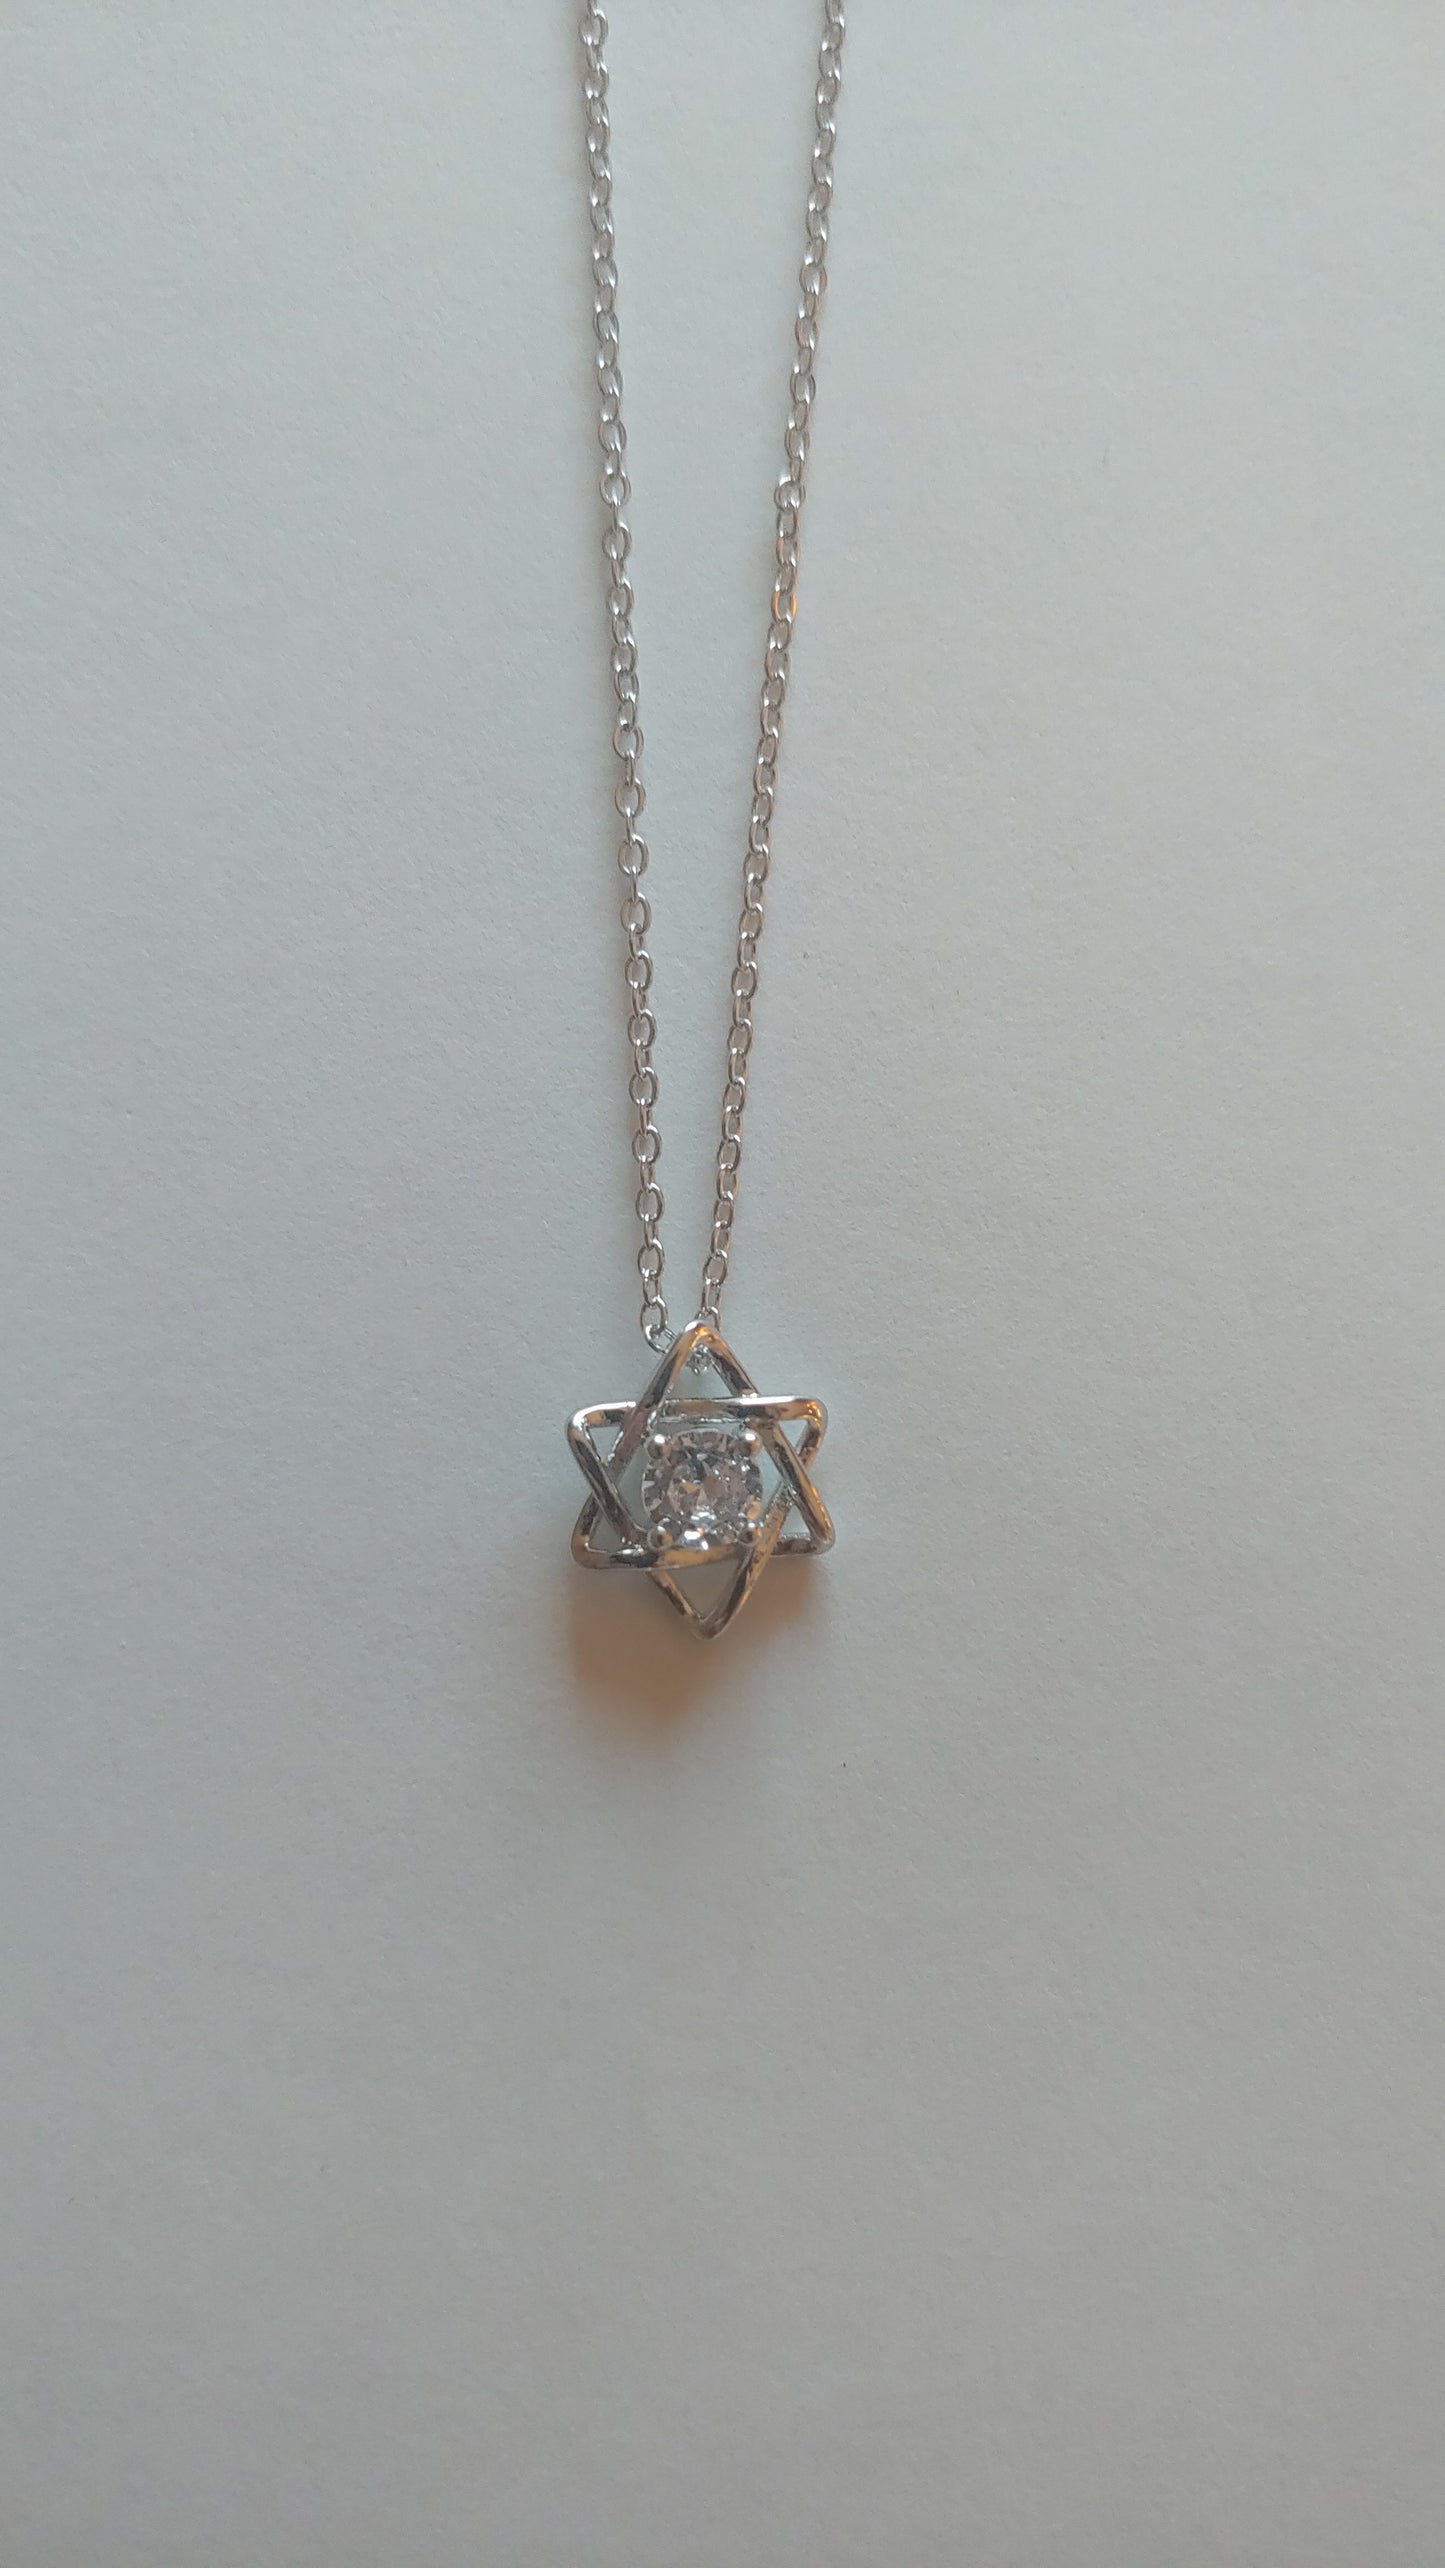 Star of David Necklace - Dainty with Cubic Zirconia Center